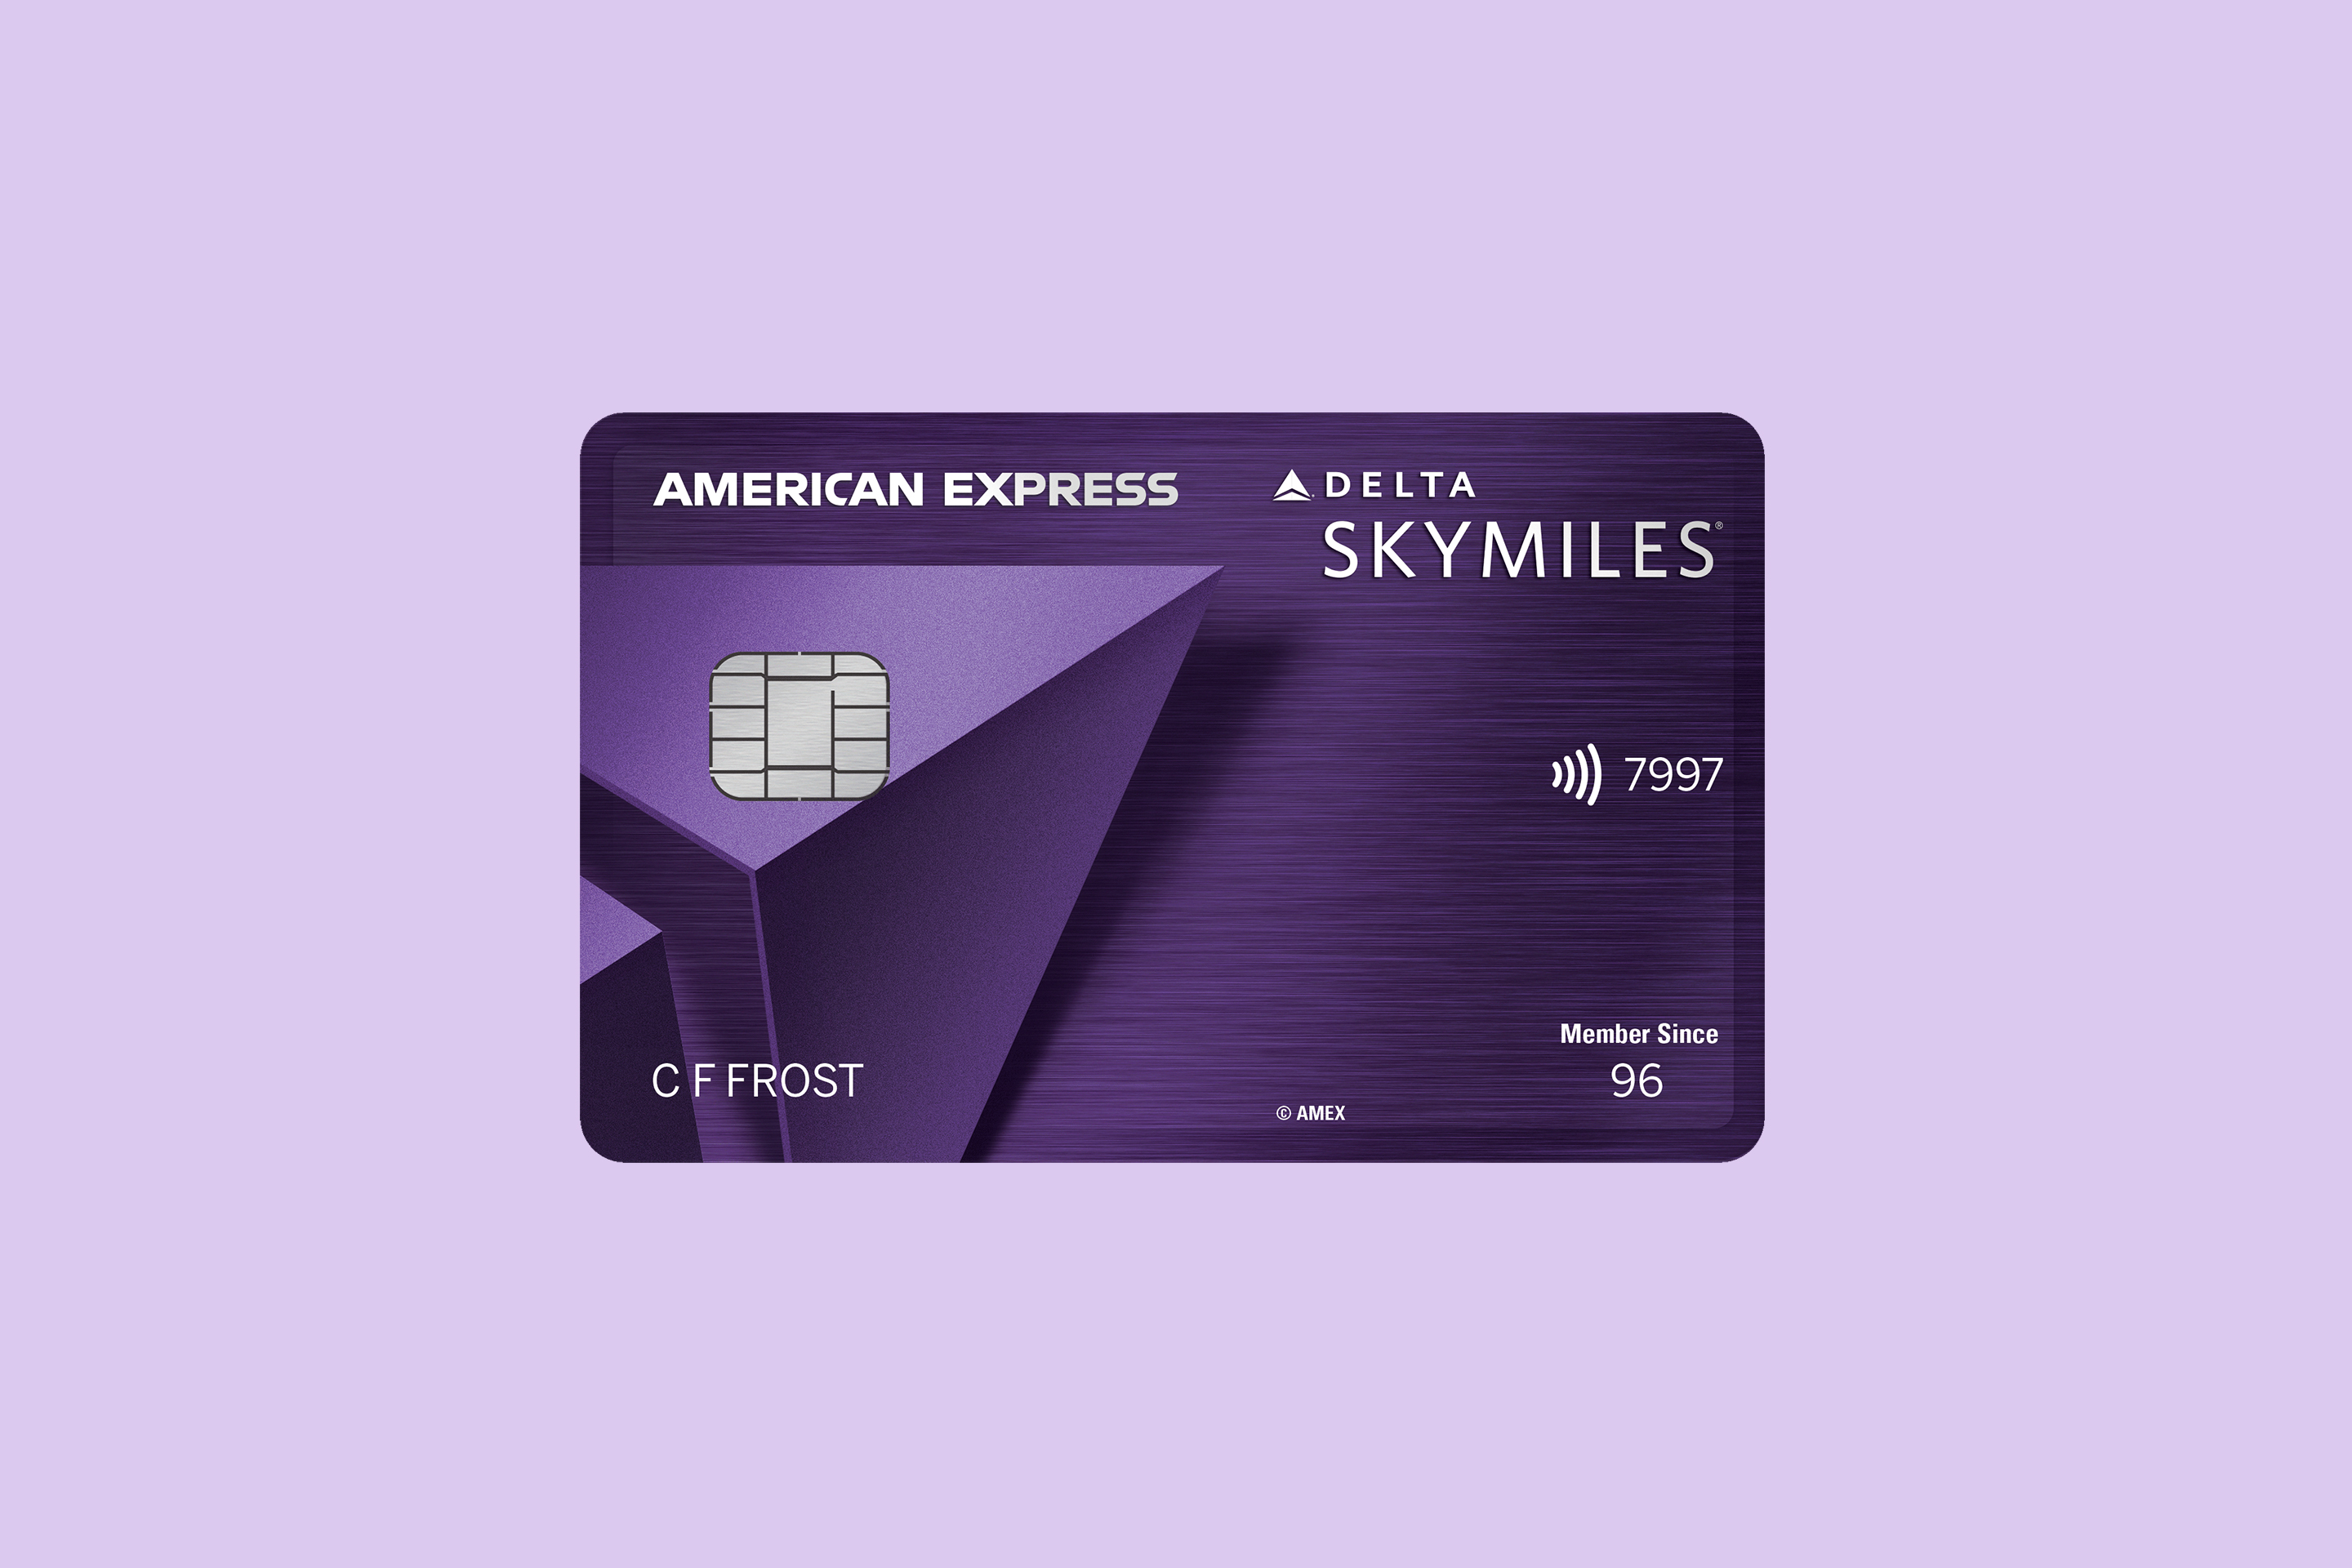 Delta SkyMiles. Credit Card by American Express